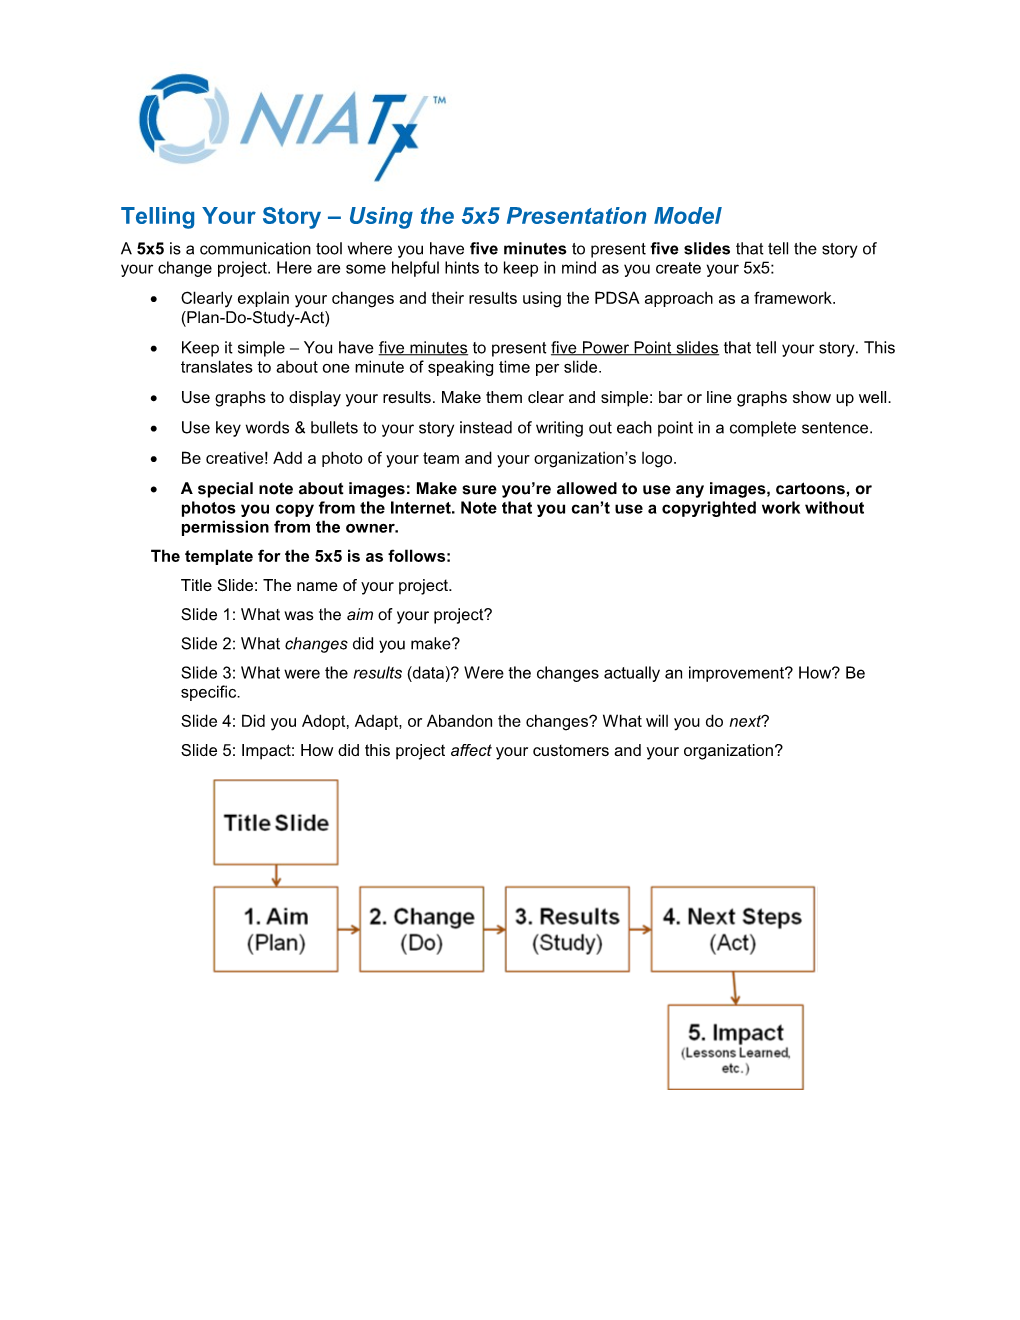 Telling Your Story Using the 5X5 Presentation Model